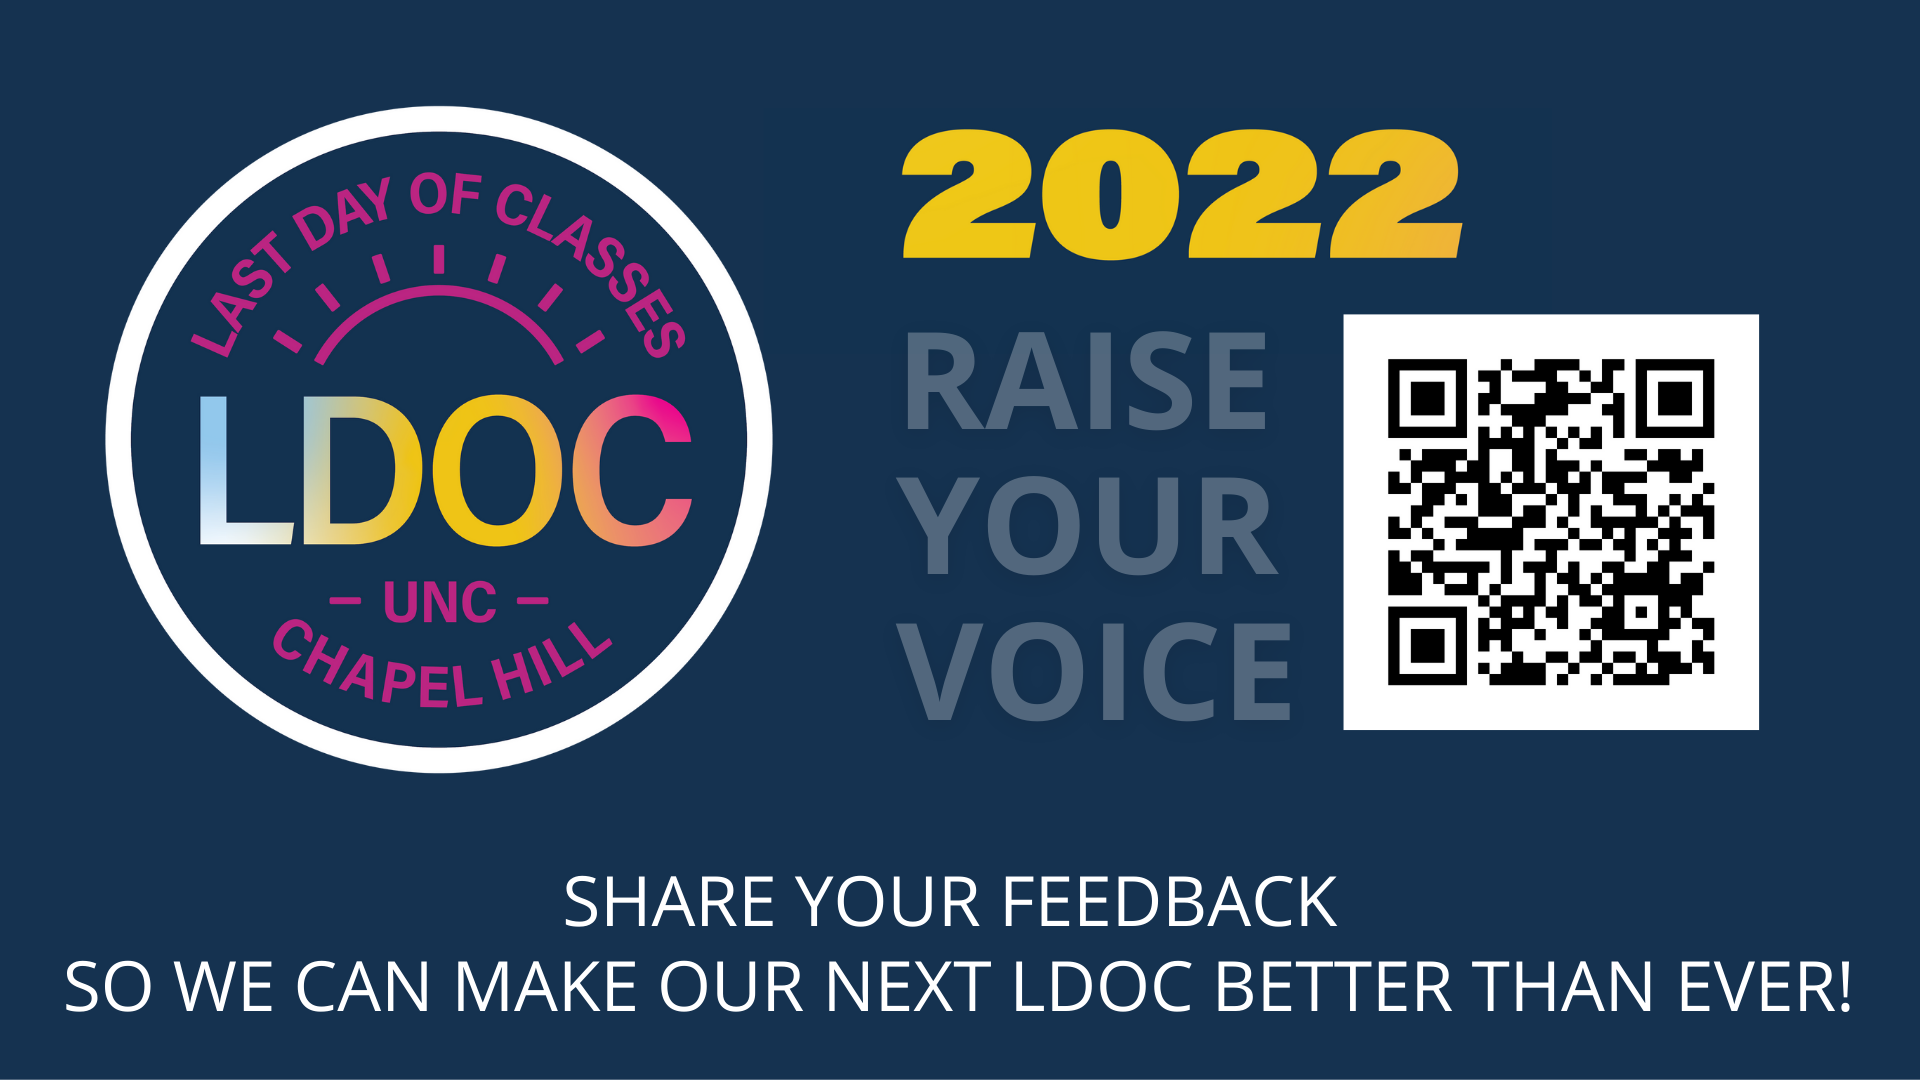 Share your feedback so we can make our next ldoc better than ever